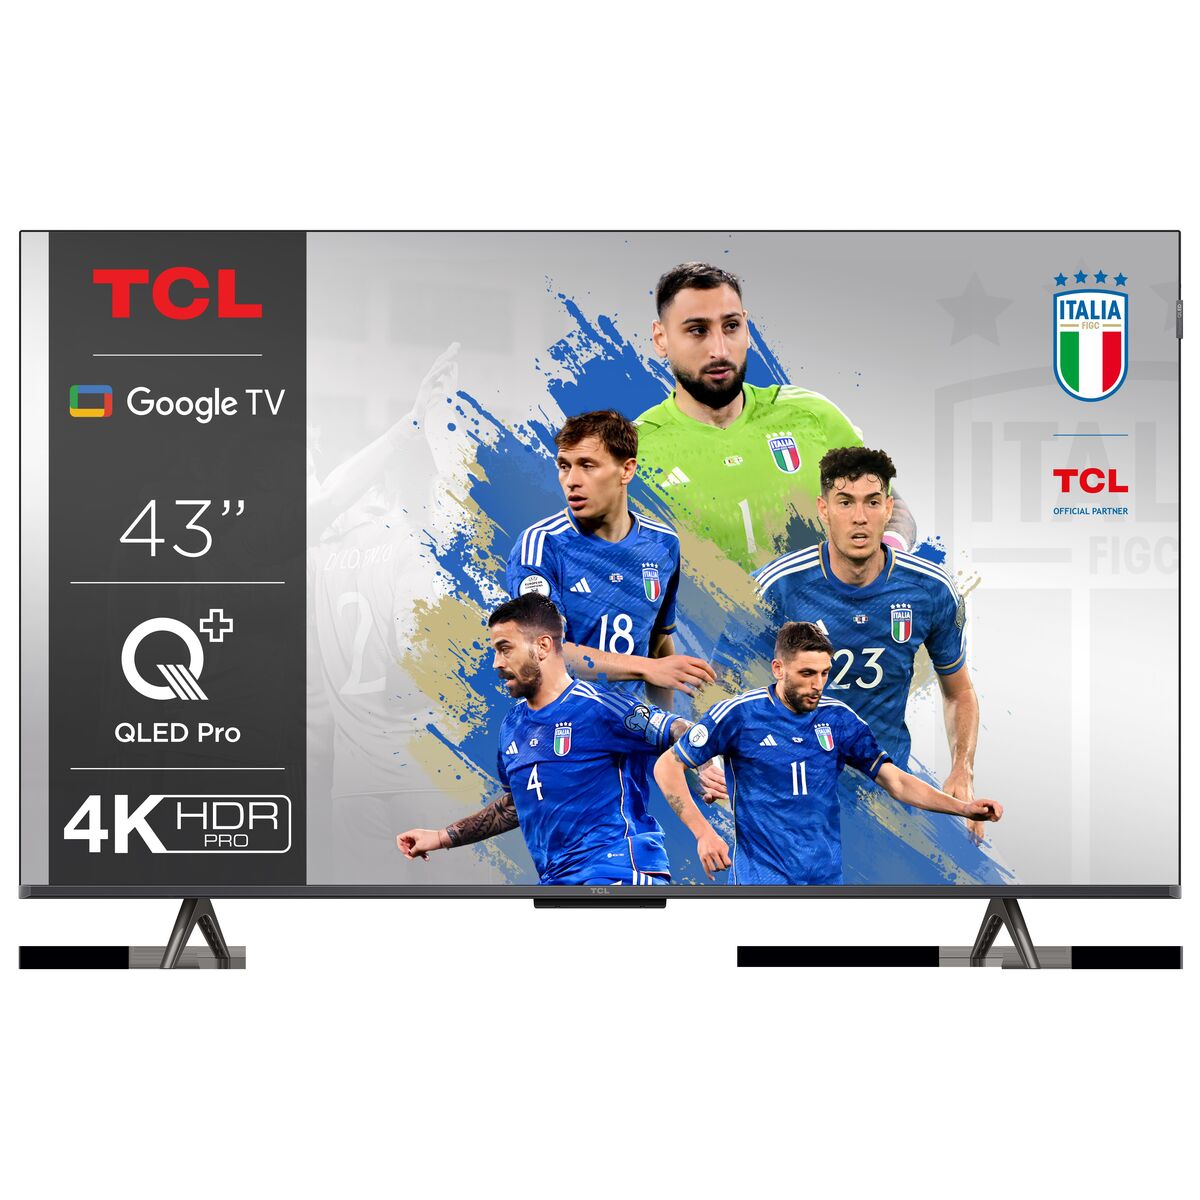 Smart TV TCL 43C655 4K Ultra HD 43" QLED, TCL, Electronics, TV, Video and home cinema, smart-tv-tcl-43c655-4k-ultra-hd-43-qled, Brand_TCL, category-reference-2609, category-reference-2625, category-reference-2931, category-reference-t-18805, category-reference-t-18827, category-reference-t-19653, cinema and television, Condition_NEW, entertainment, Price_300 - 400, RiotNook